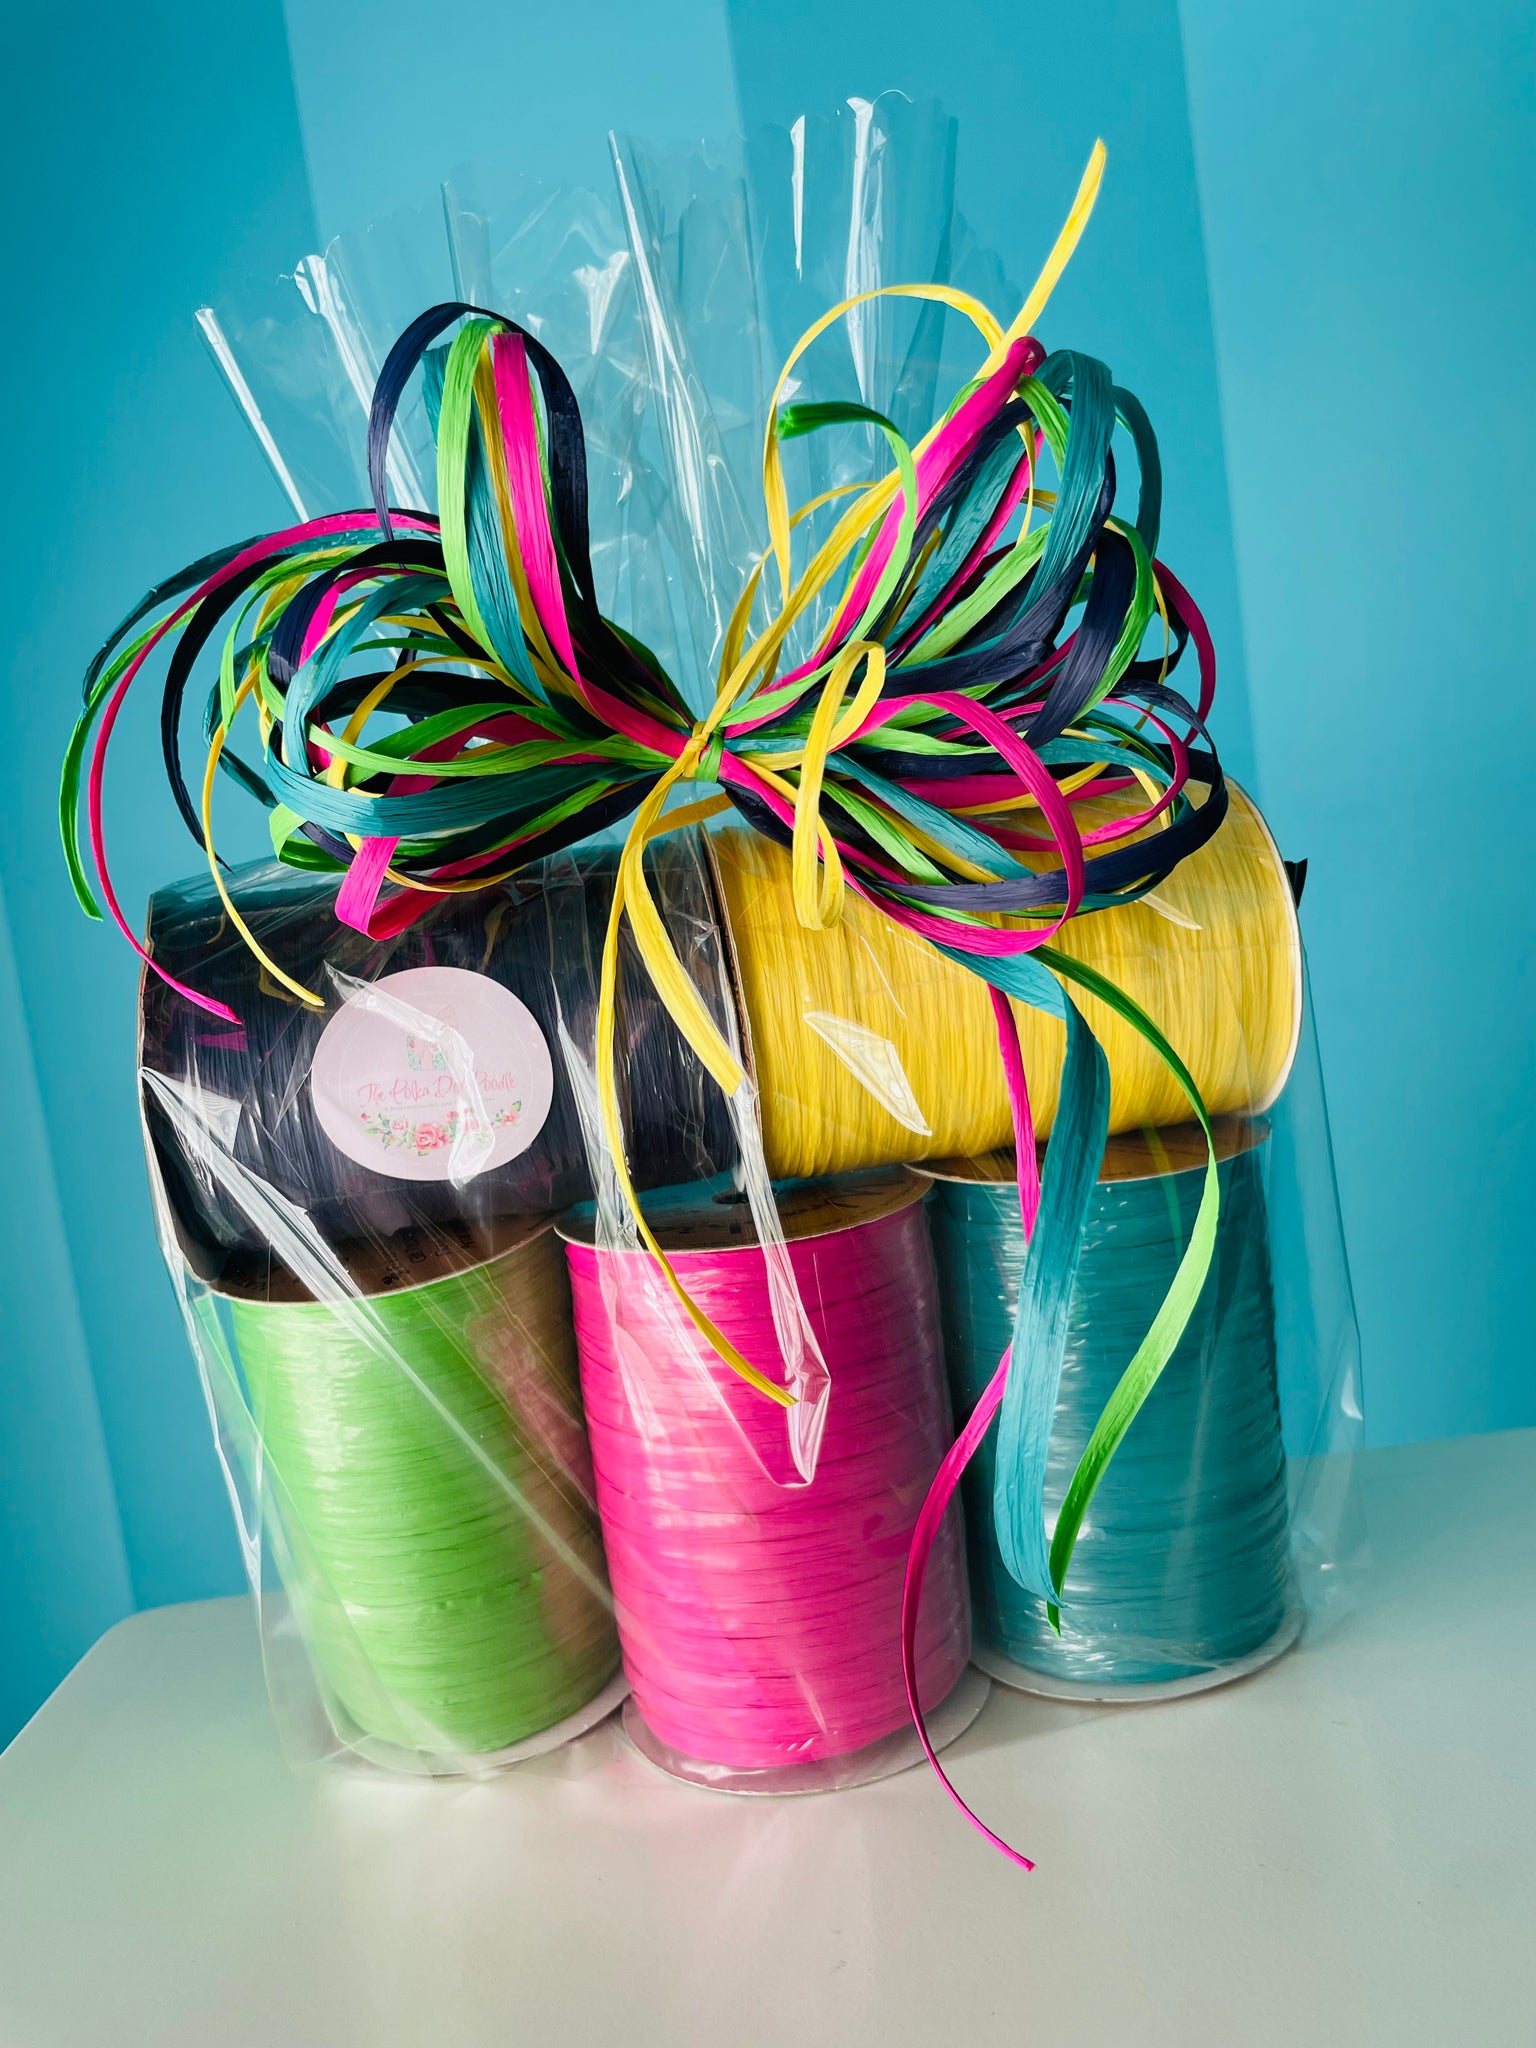 DELUXE Raffia Bundle: PDP FAB 5 (lime green, bright yellow, Teal, navy and hot pink)